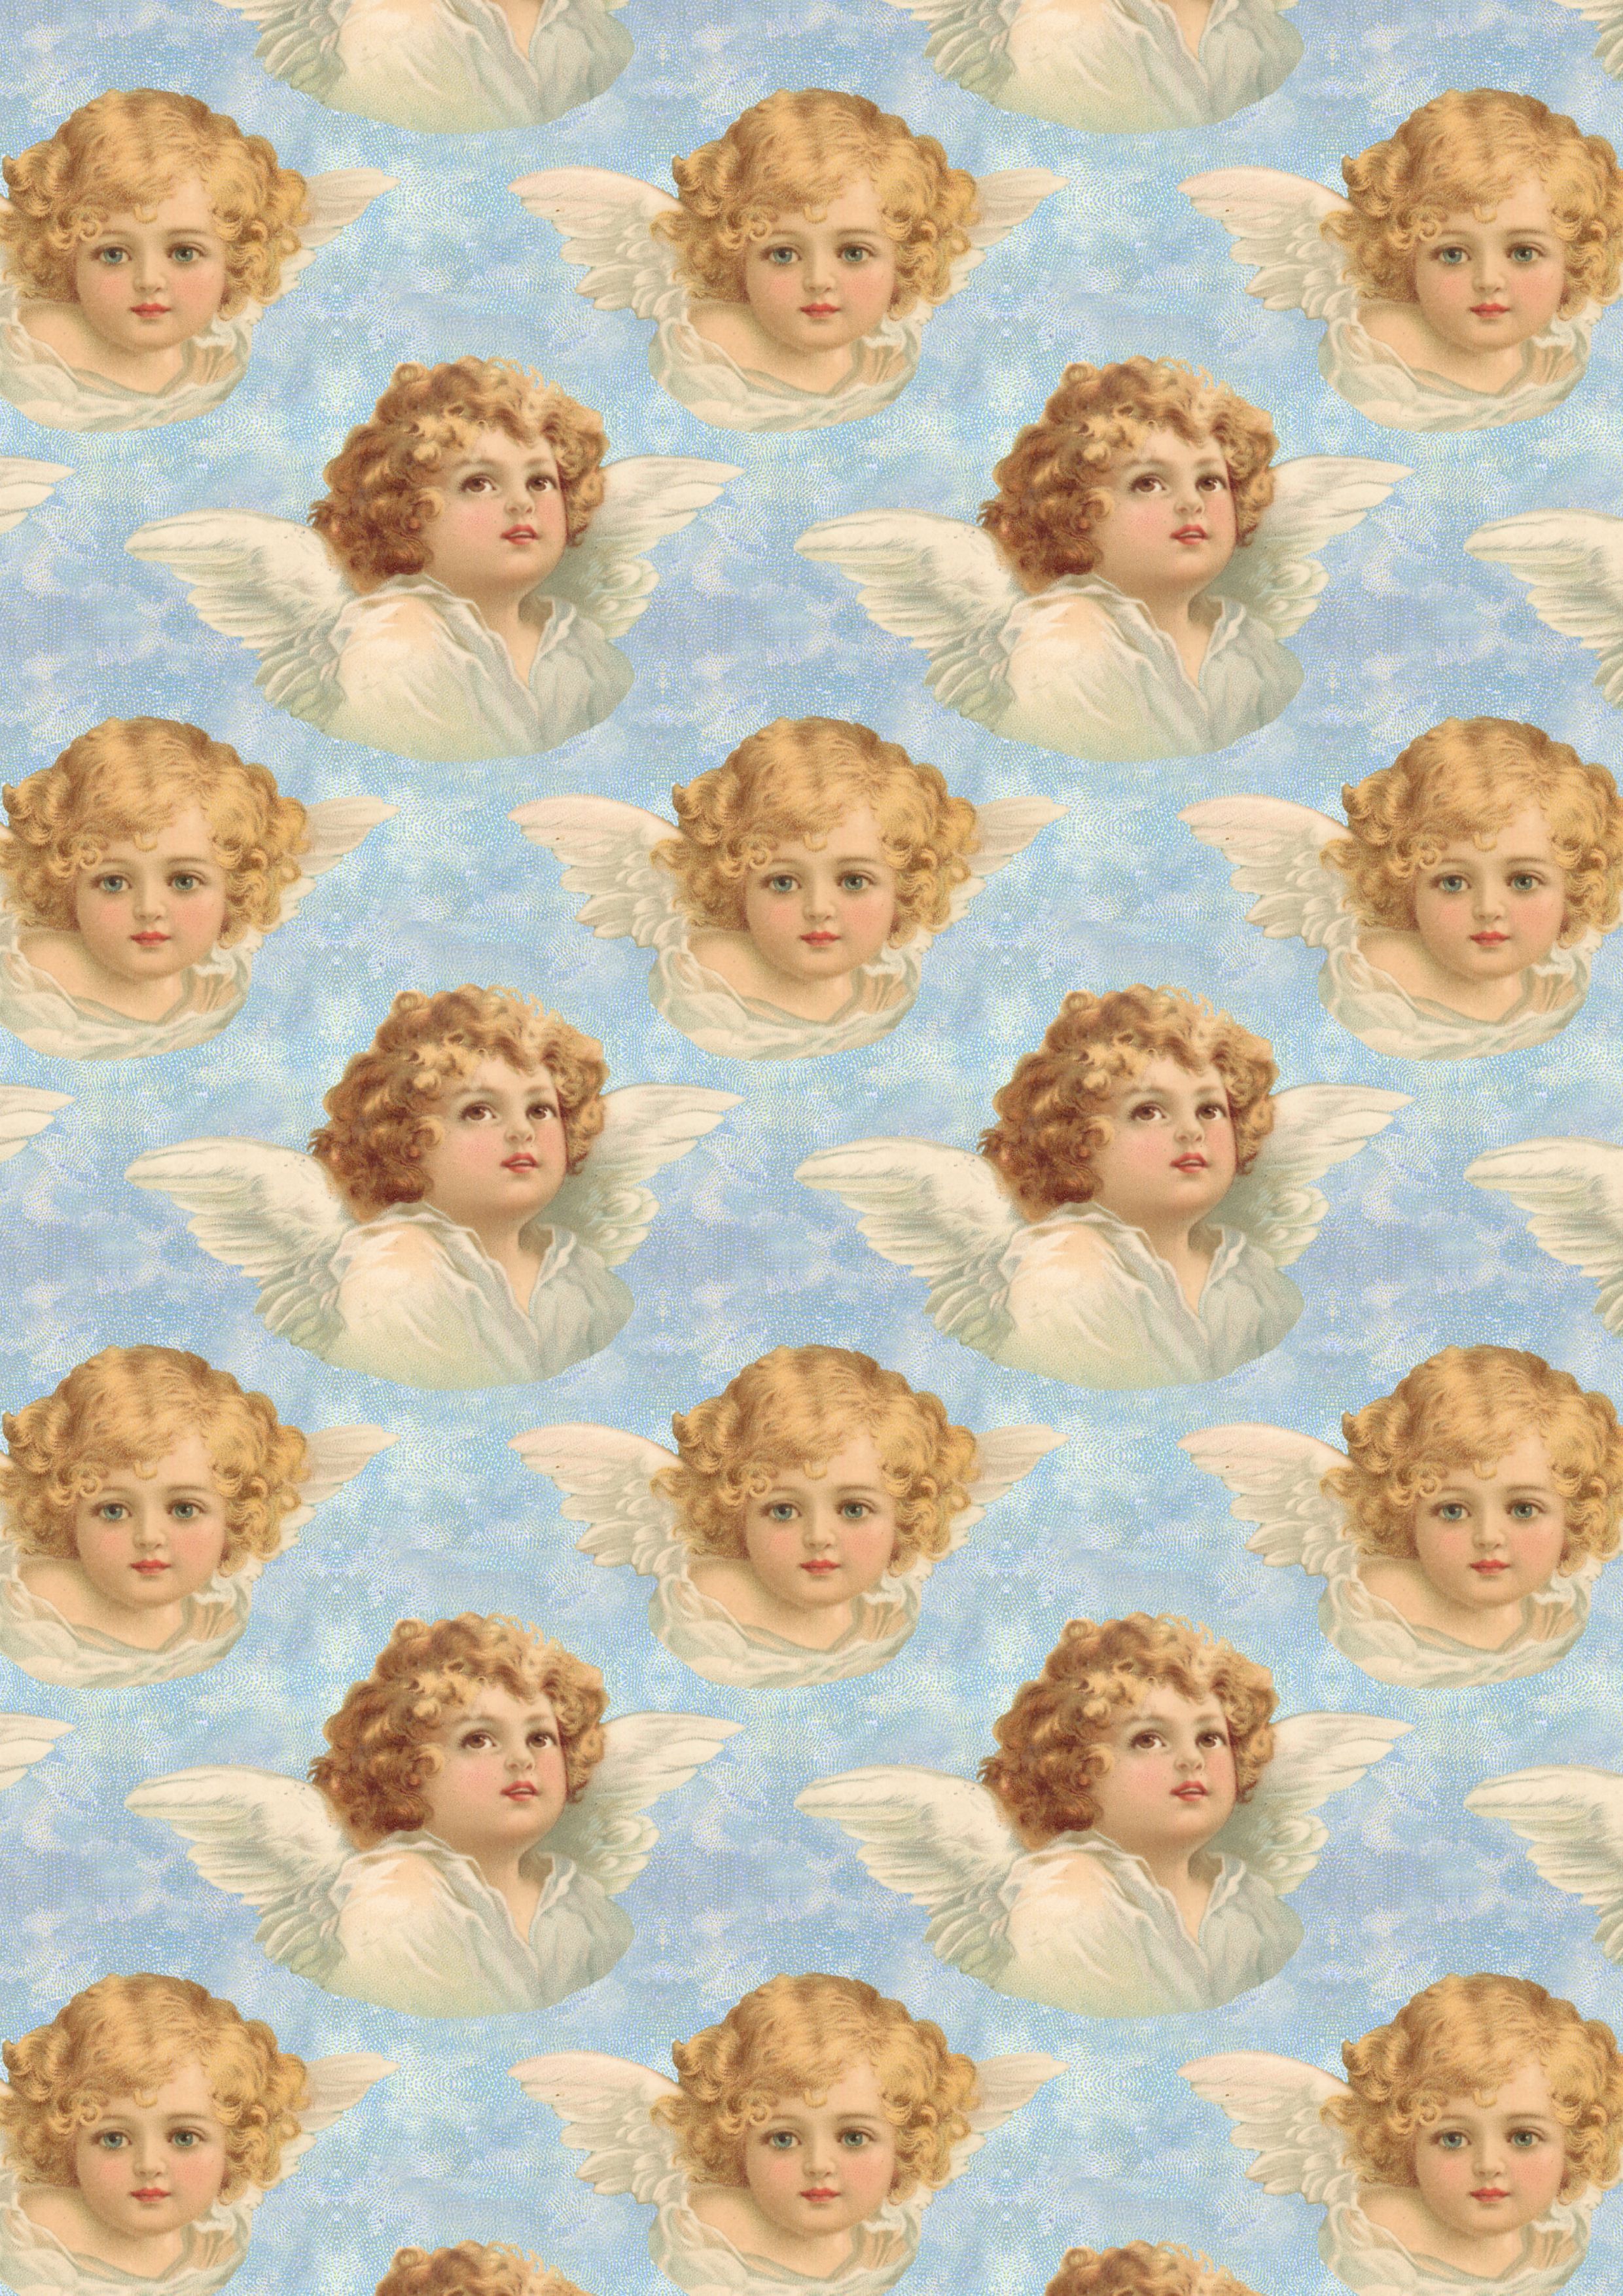 A paper with many images of cherubs on it - Angels, angelcore